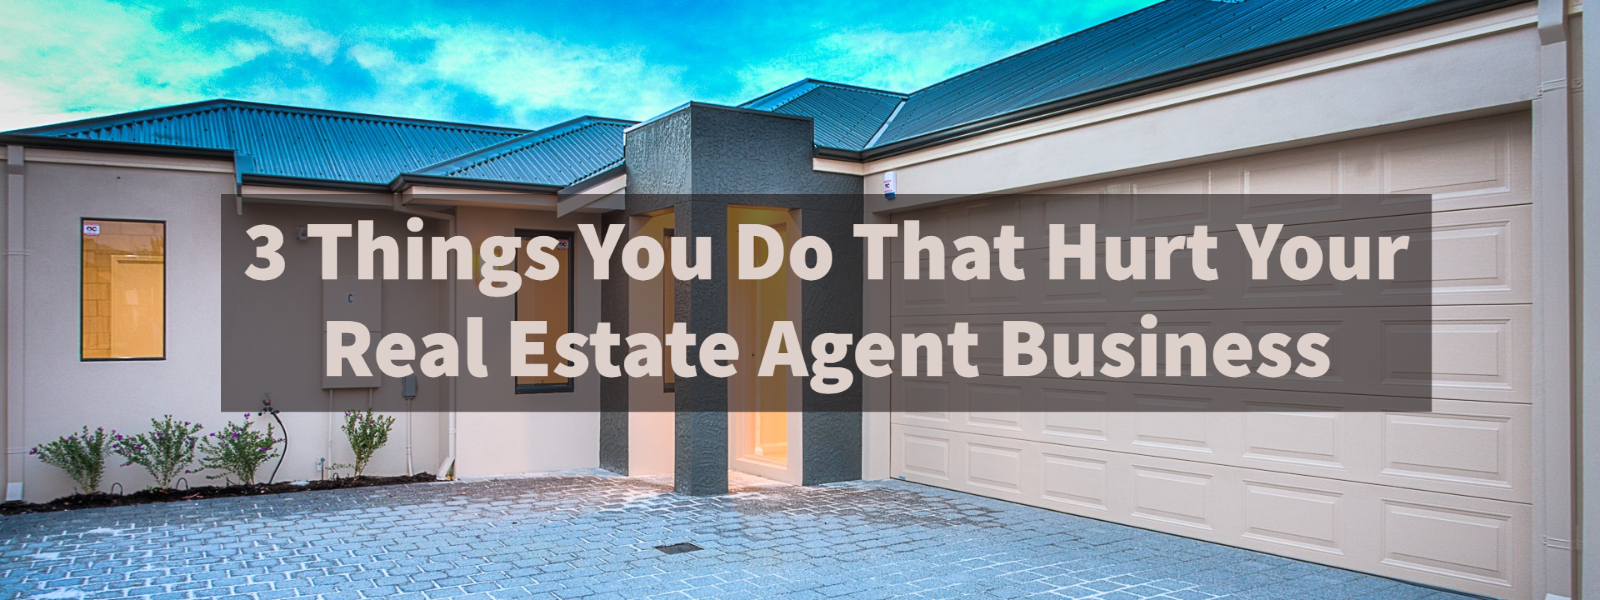 3 Things You Do That Hurt Your Real Estate Agent Business